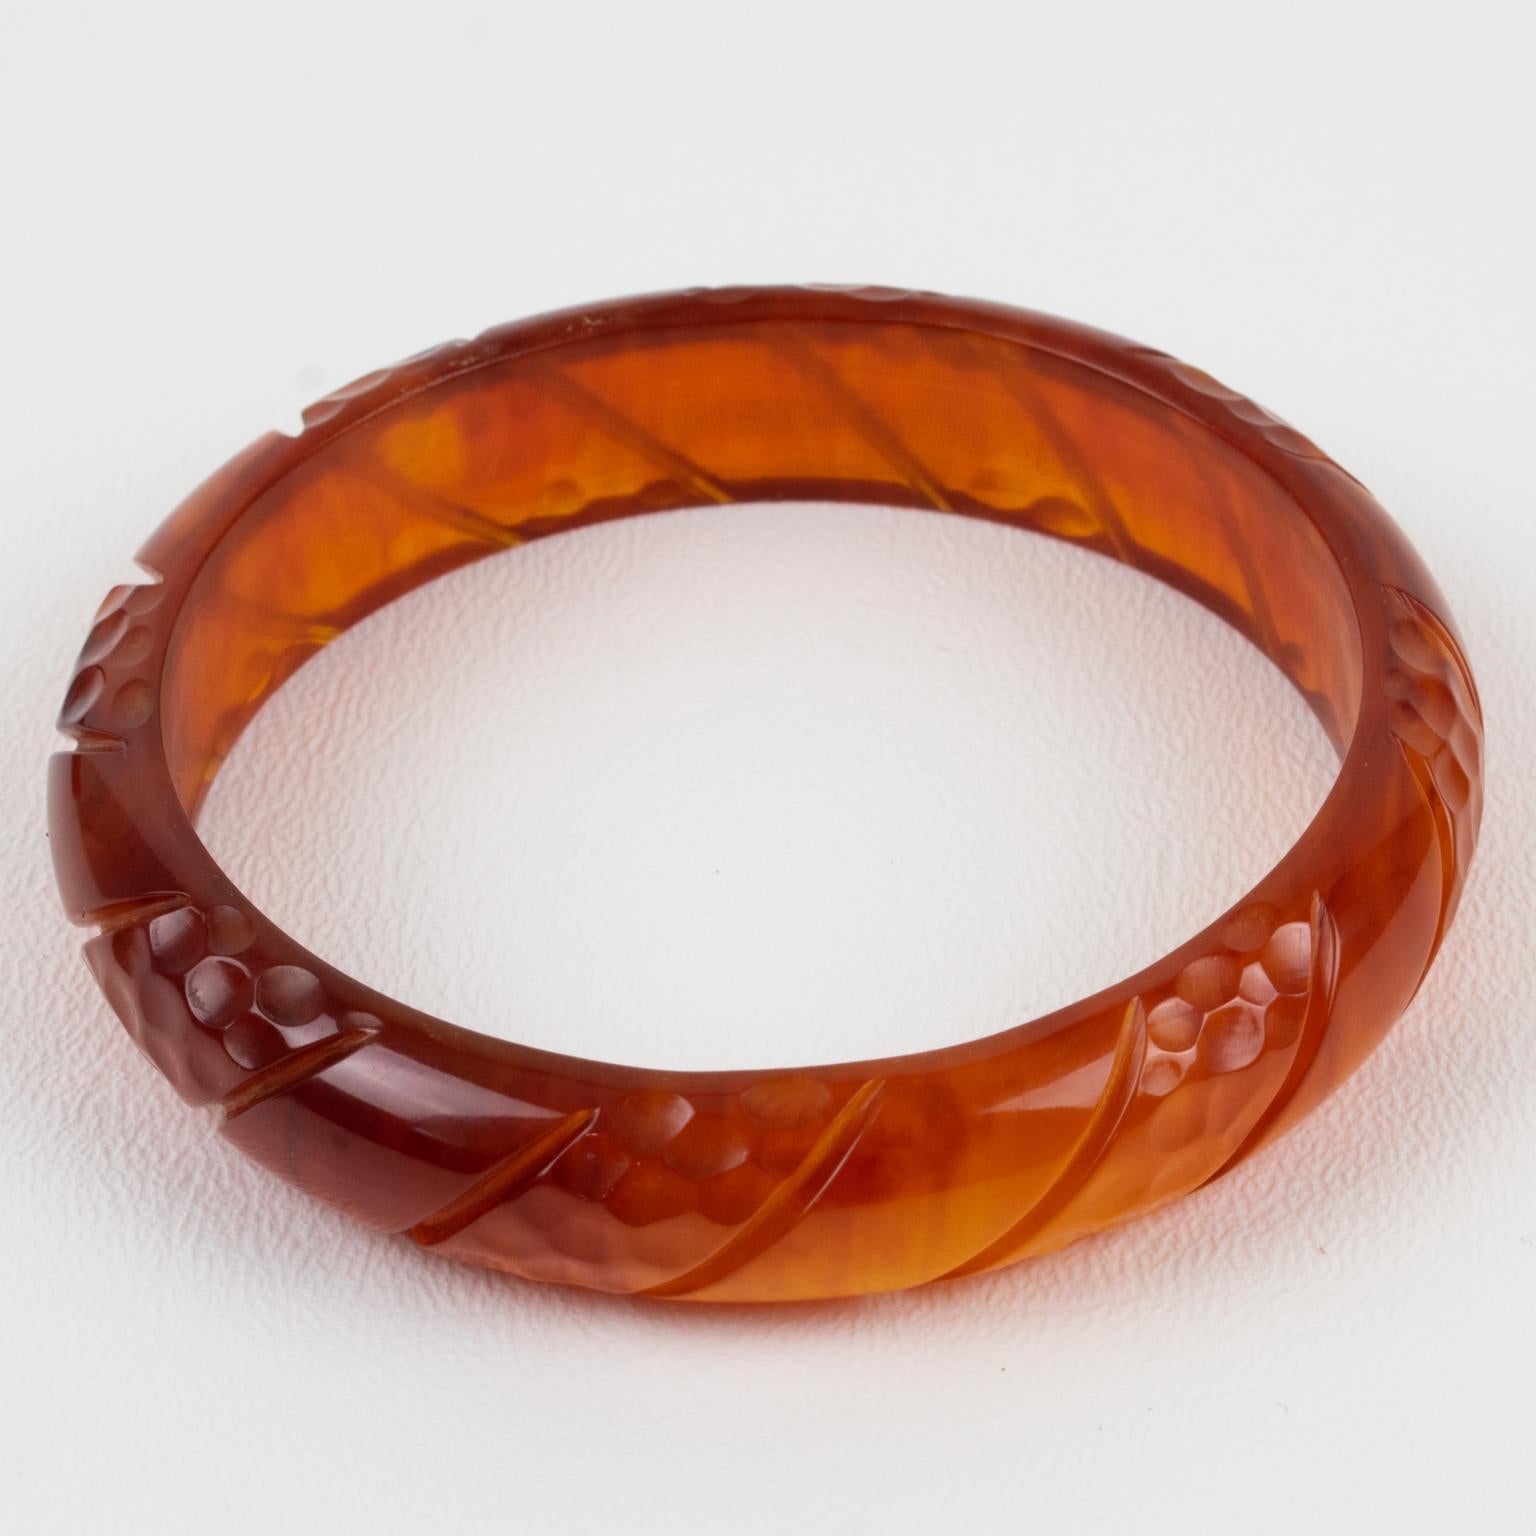 This is a lovely red tea amber Bakelite carved bracelet bangle. It features a spacer domed shape with deep geometric carving all around. The color is an intense red-amber tone with complete transparency. 
Measurements: Inside across is 2.63 in